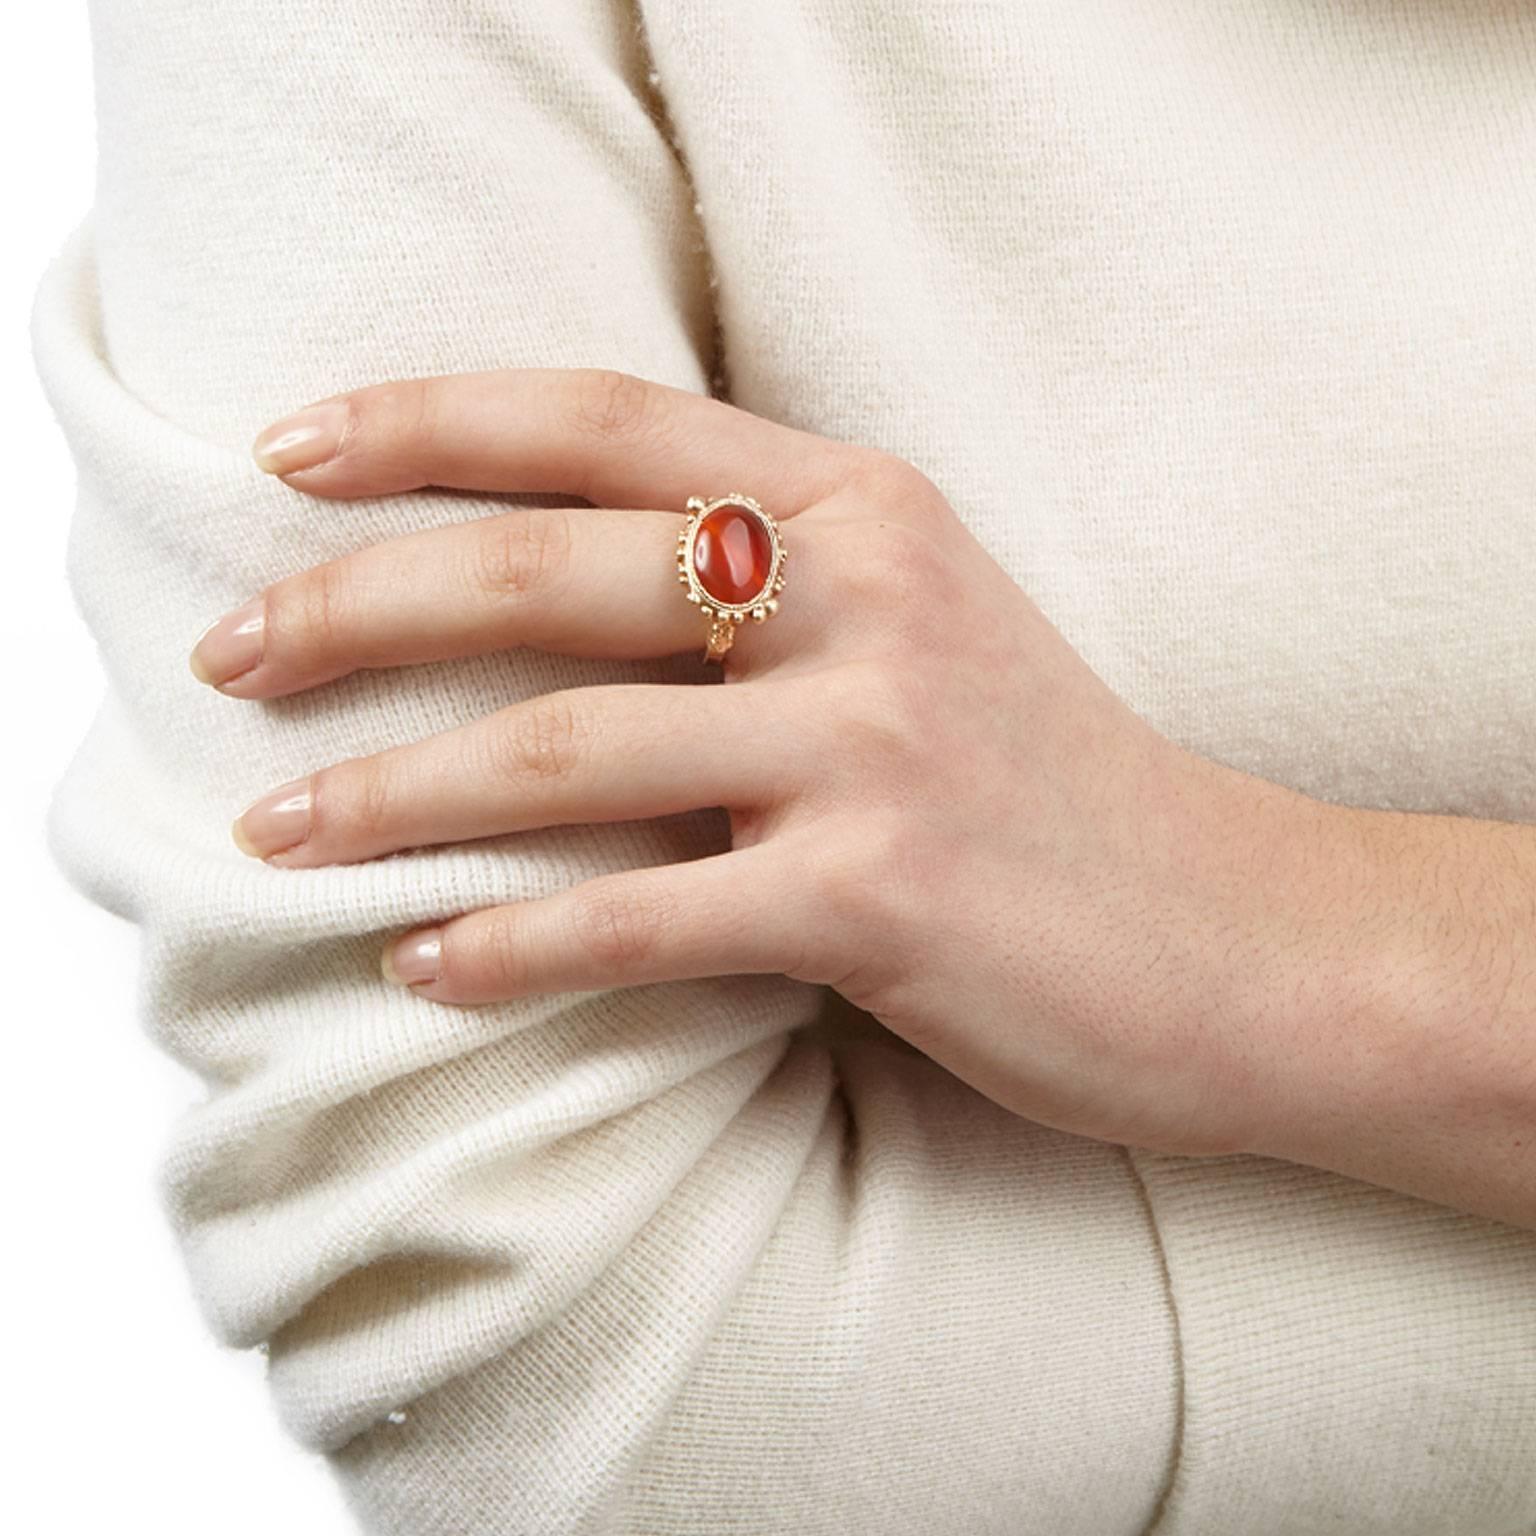 The beautiful Celeste ring displays a deep orange carnelian stone at its centre, encrusted in rose gold plated silver atop a hammered band. Bringing a little bit of daily decadence to any outfit.

Ring size: UK M / US 6.25 / EU 12.5
Stone